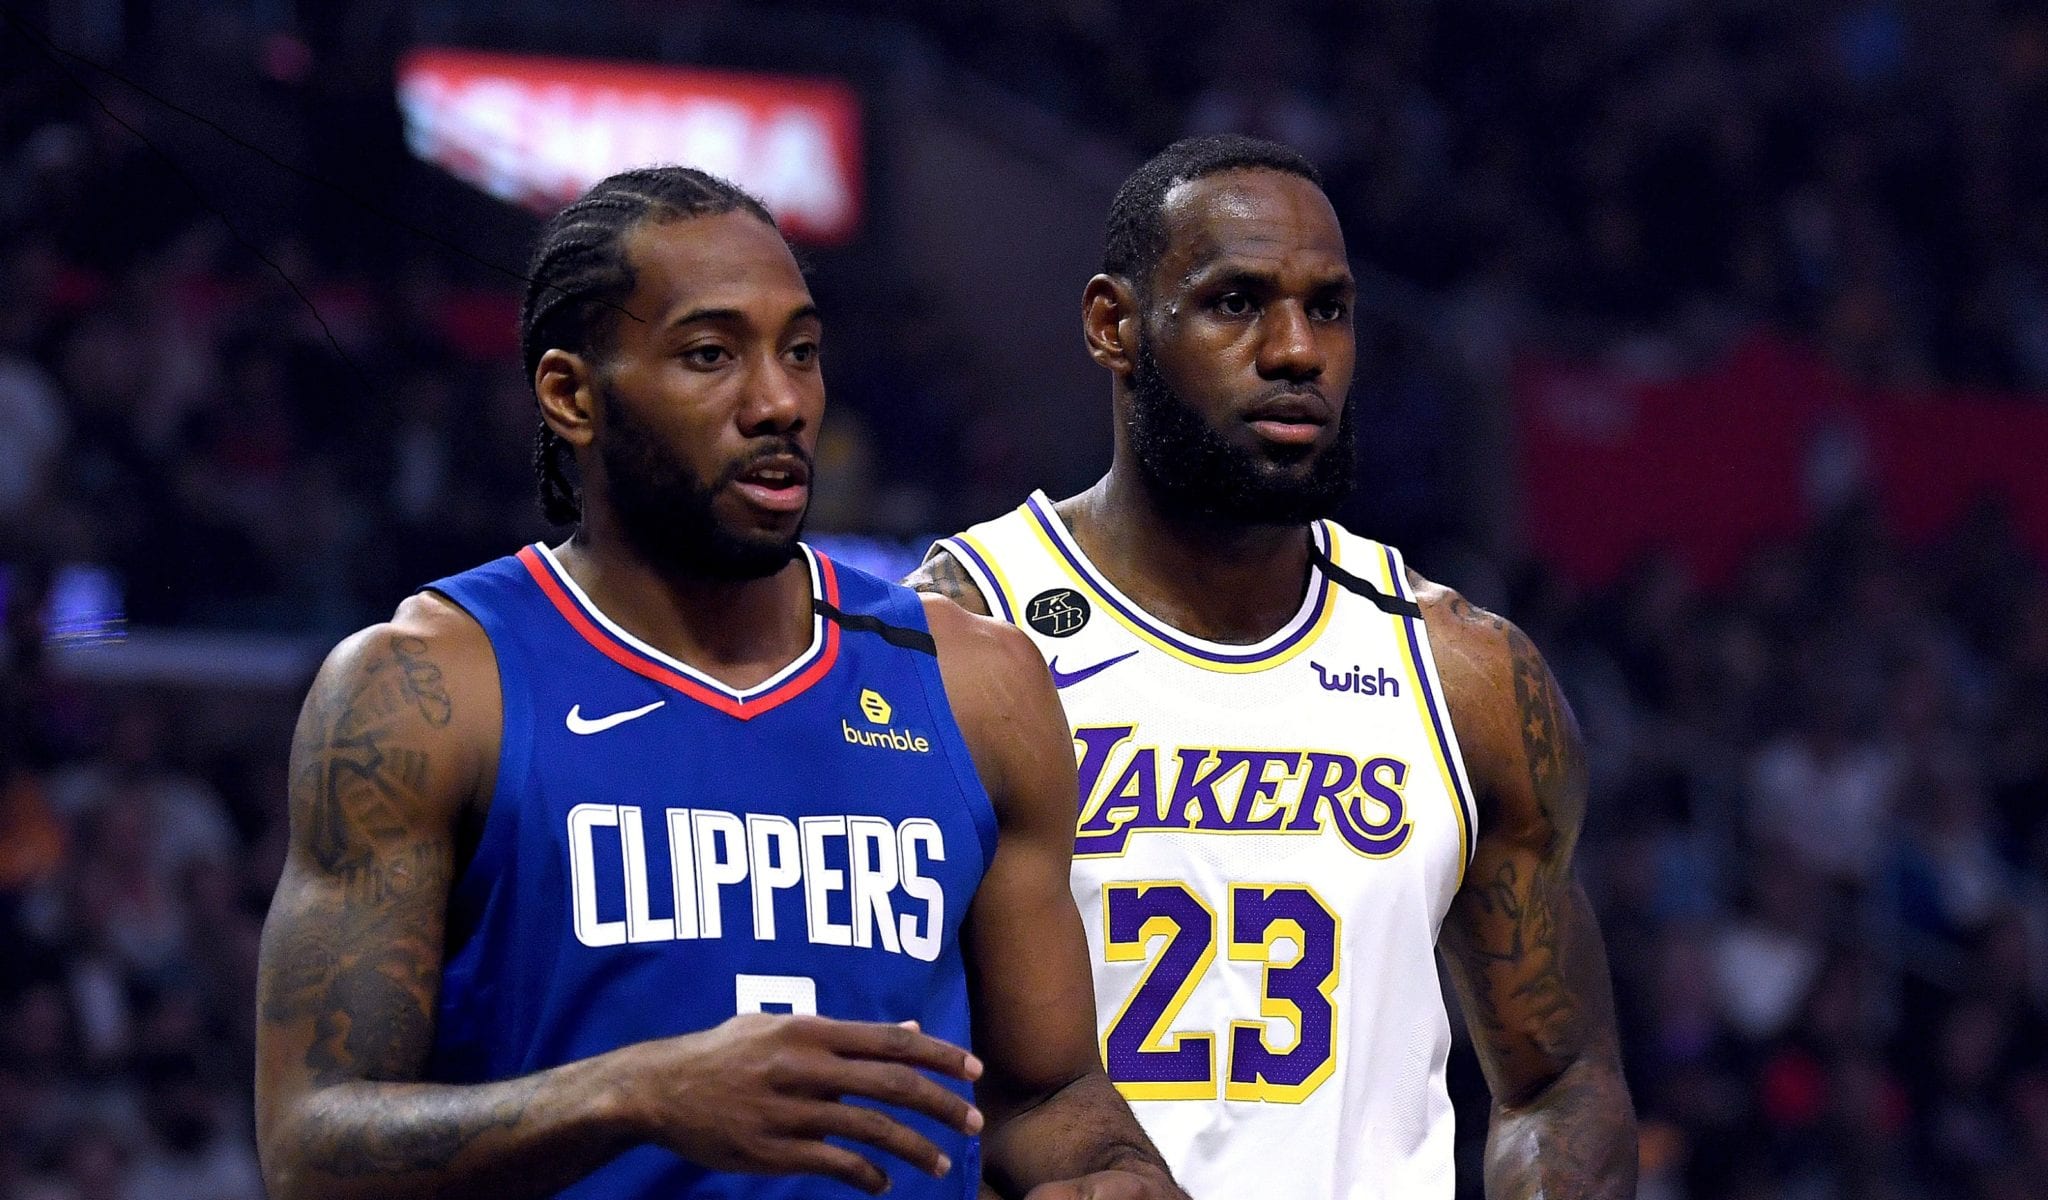 Lakers vs Clippers: What to Watch Out For